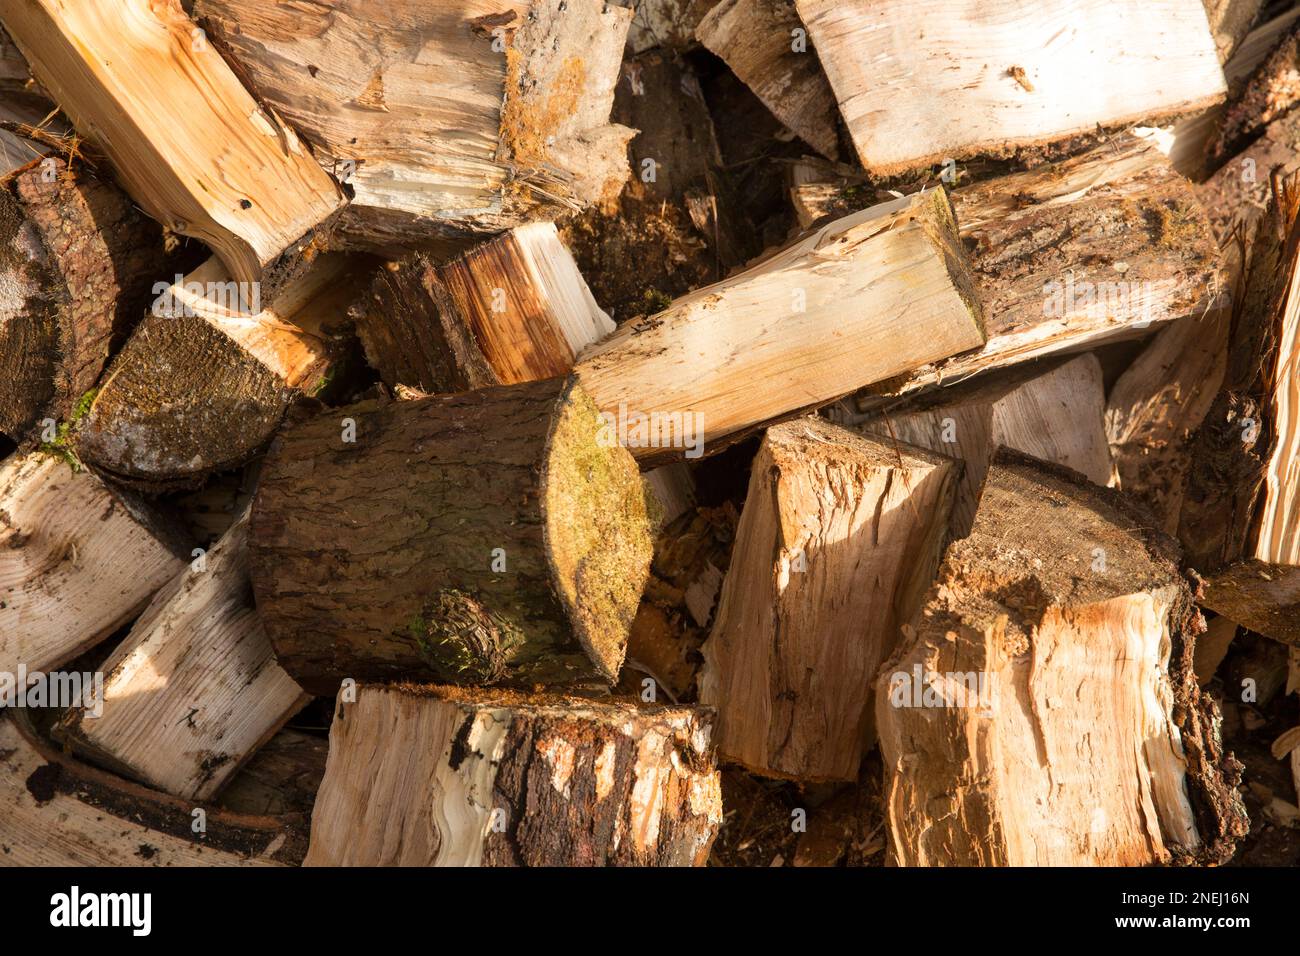 Logs that have been split with an axe that will be placed in a woodstore to dry over the summer as fuel for a wood burning stove. England UK GB Stock Photo